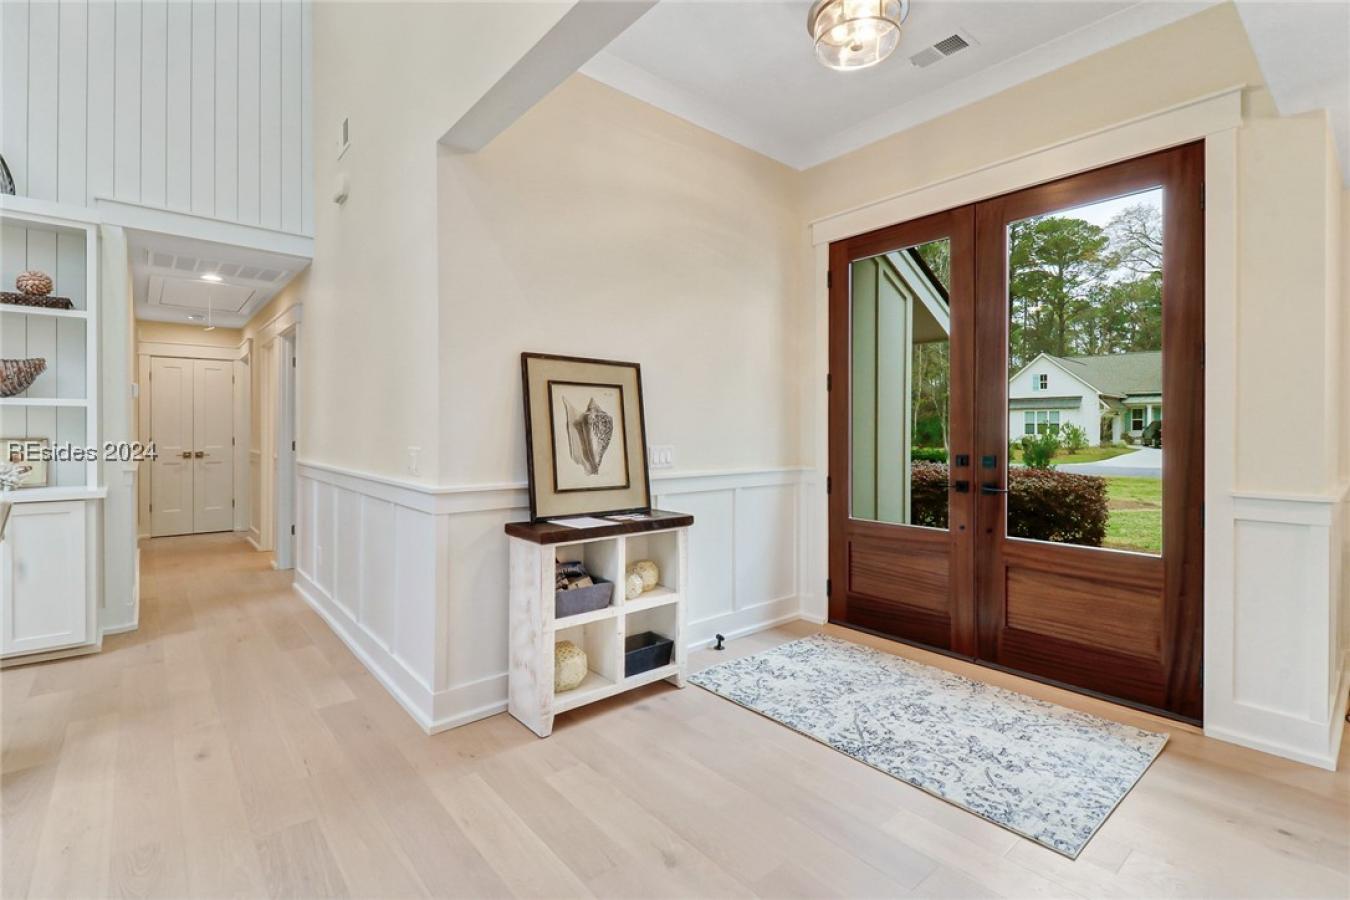 2 Coopers Hawk, Hilton Head Island, South Carolina, 29926, United States, 4 Bedrooms Bedrooms, ,3 BathroomsBathrooms,Residential,For Sale,2 Coopers Hawk,1490505